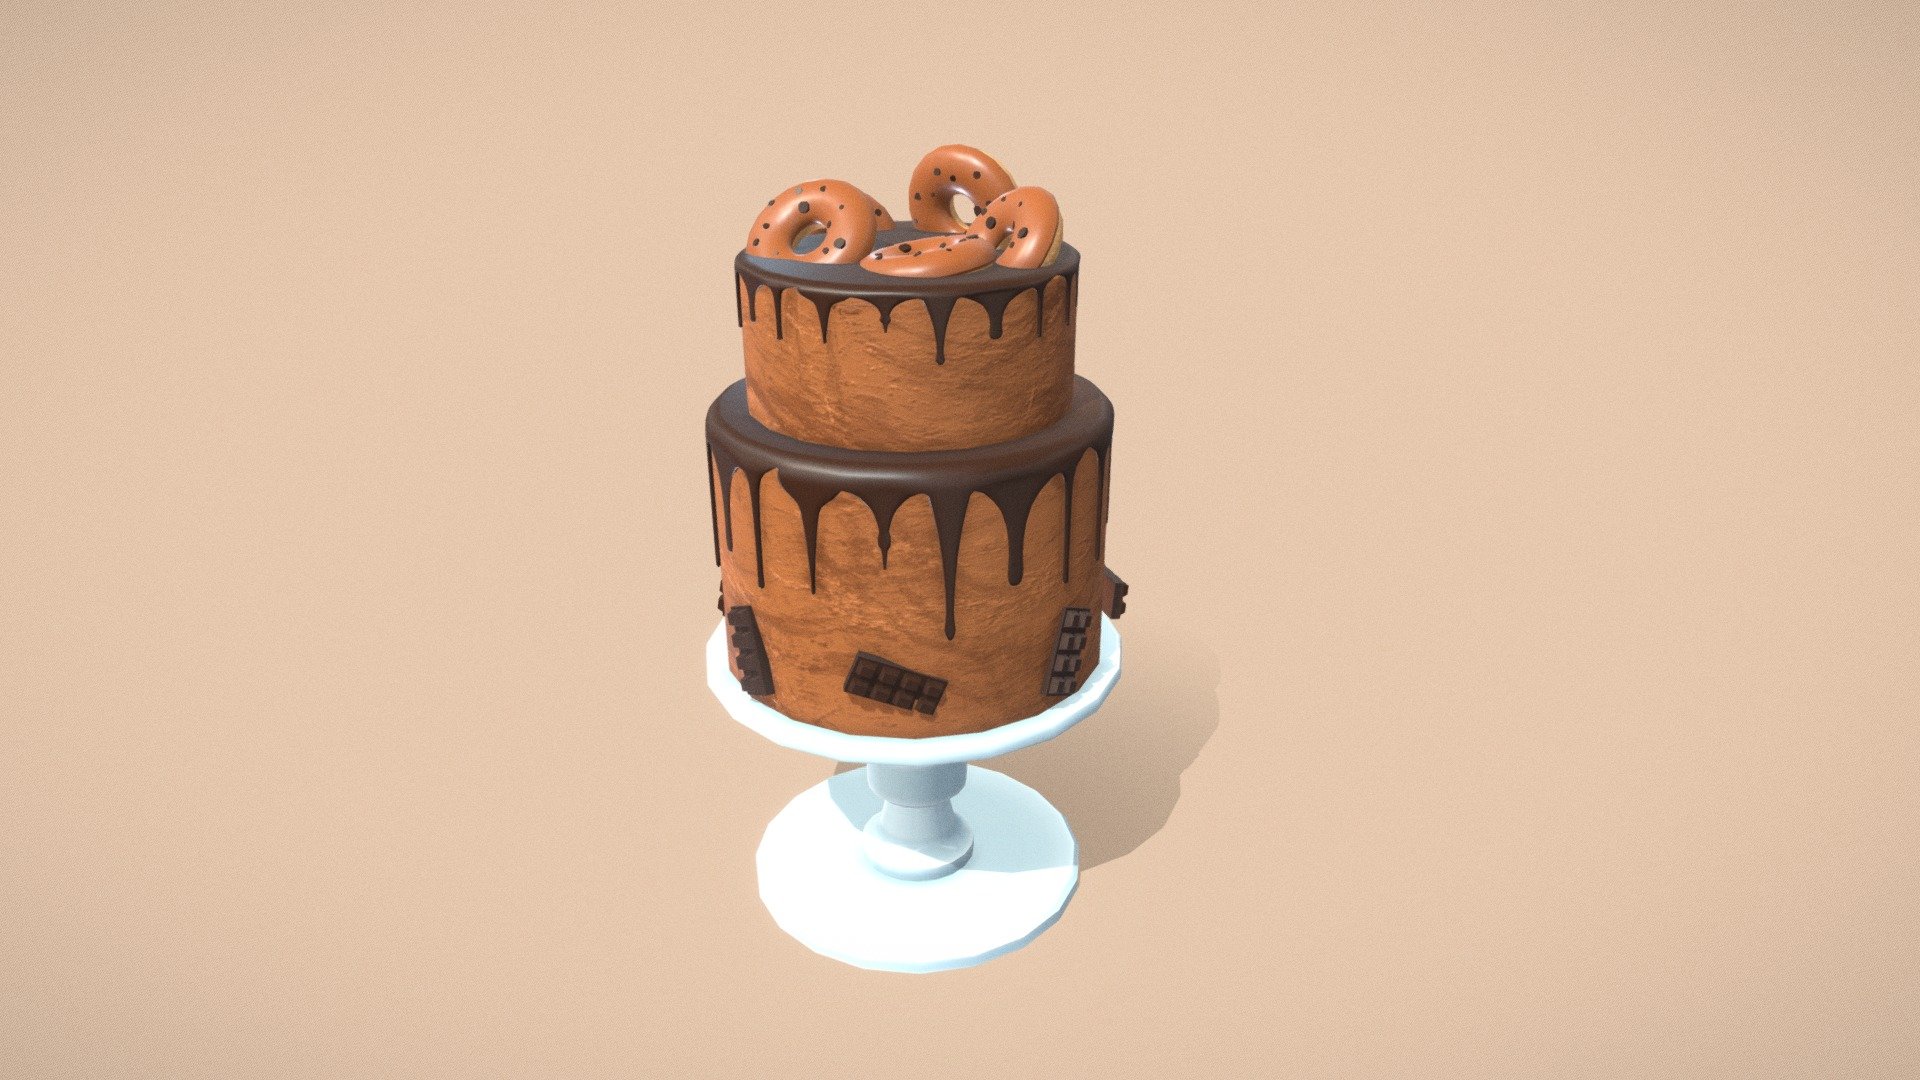 12th day of 3december.
I like chocolate a lot, so i decided to make a chocolate cake from pinterest 3d model